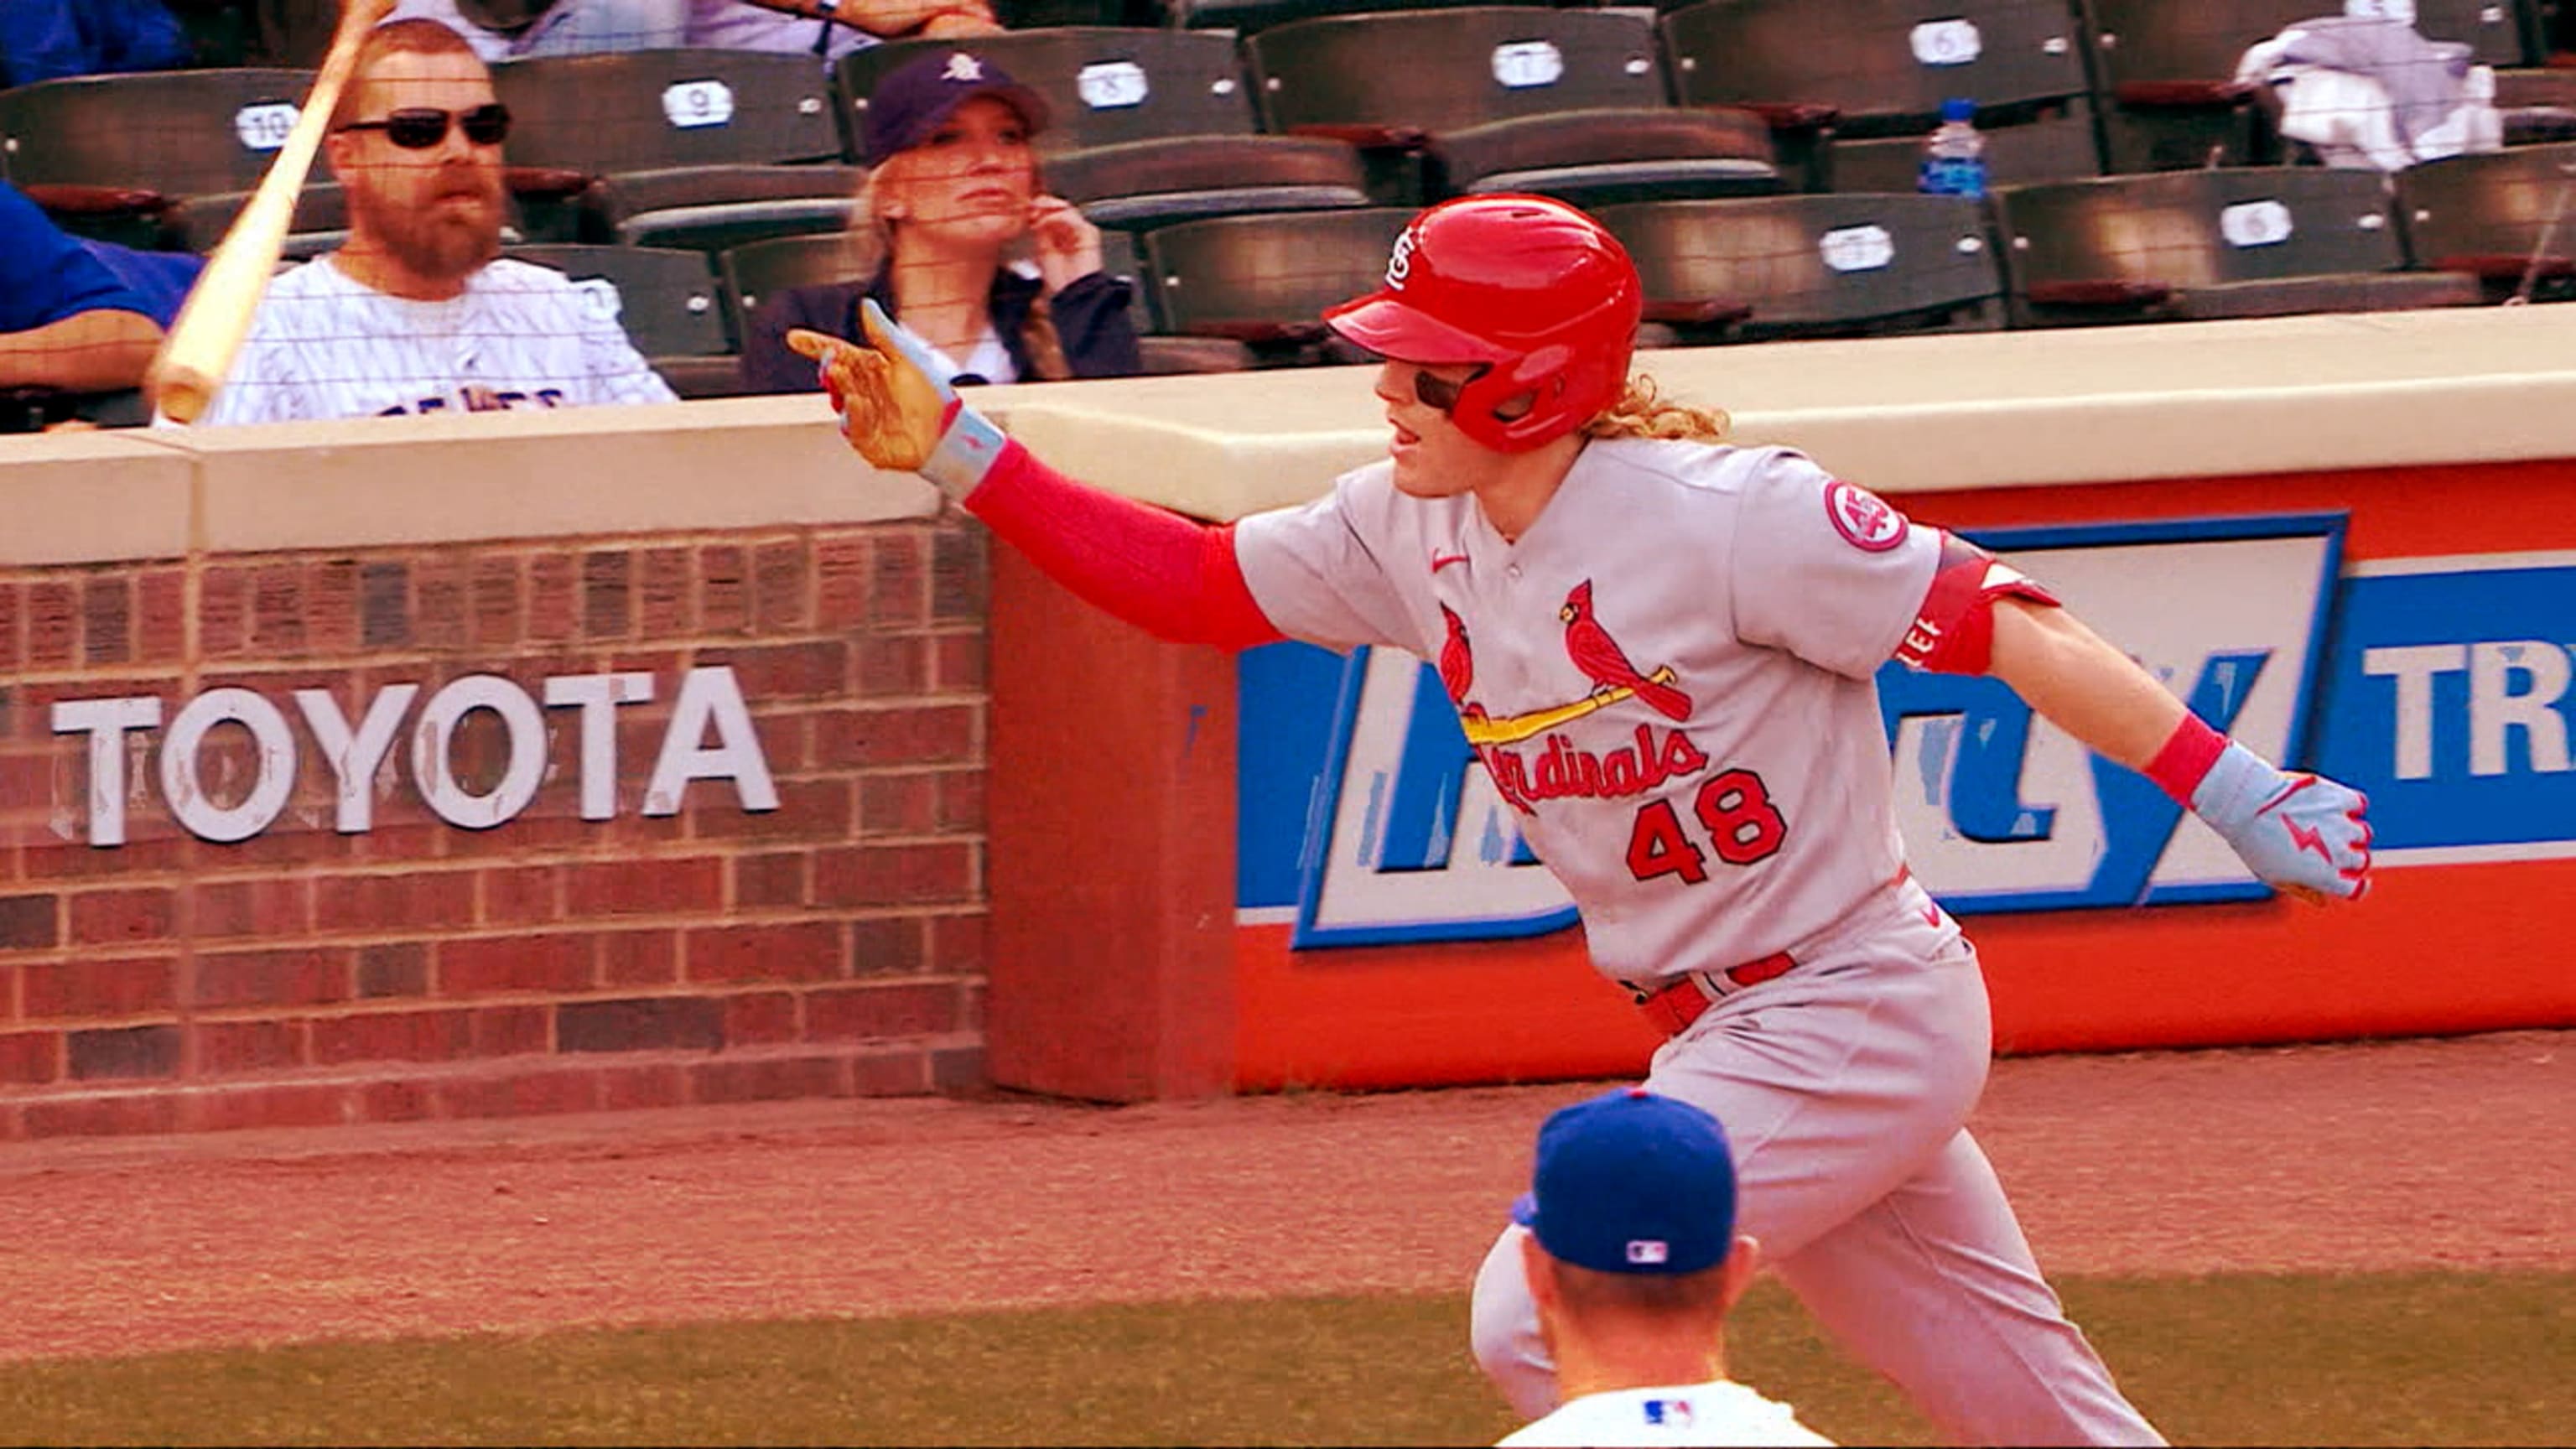 STLSportsCentral - Harrison Bader is the NL Player of the Week He